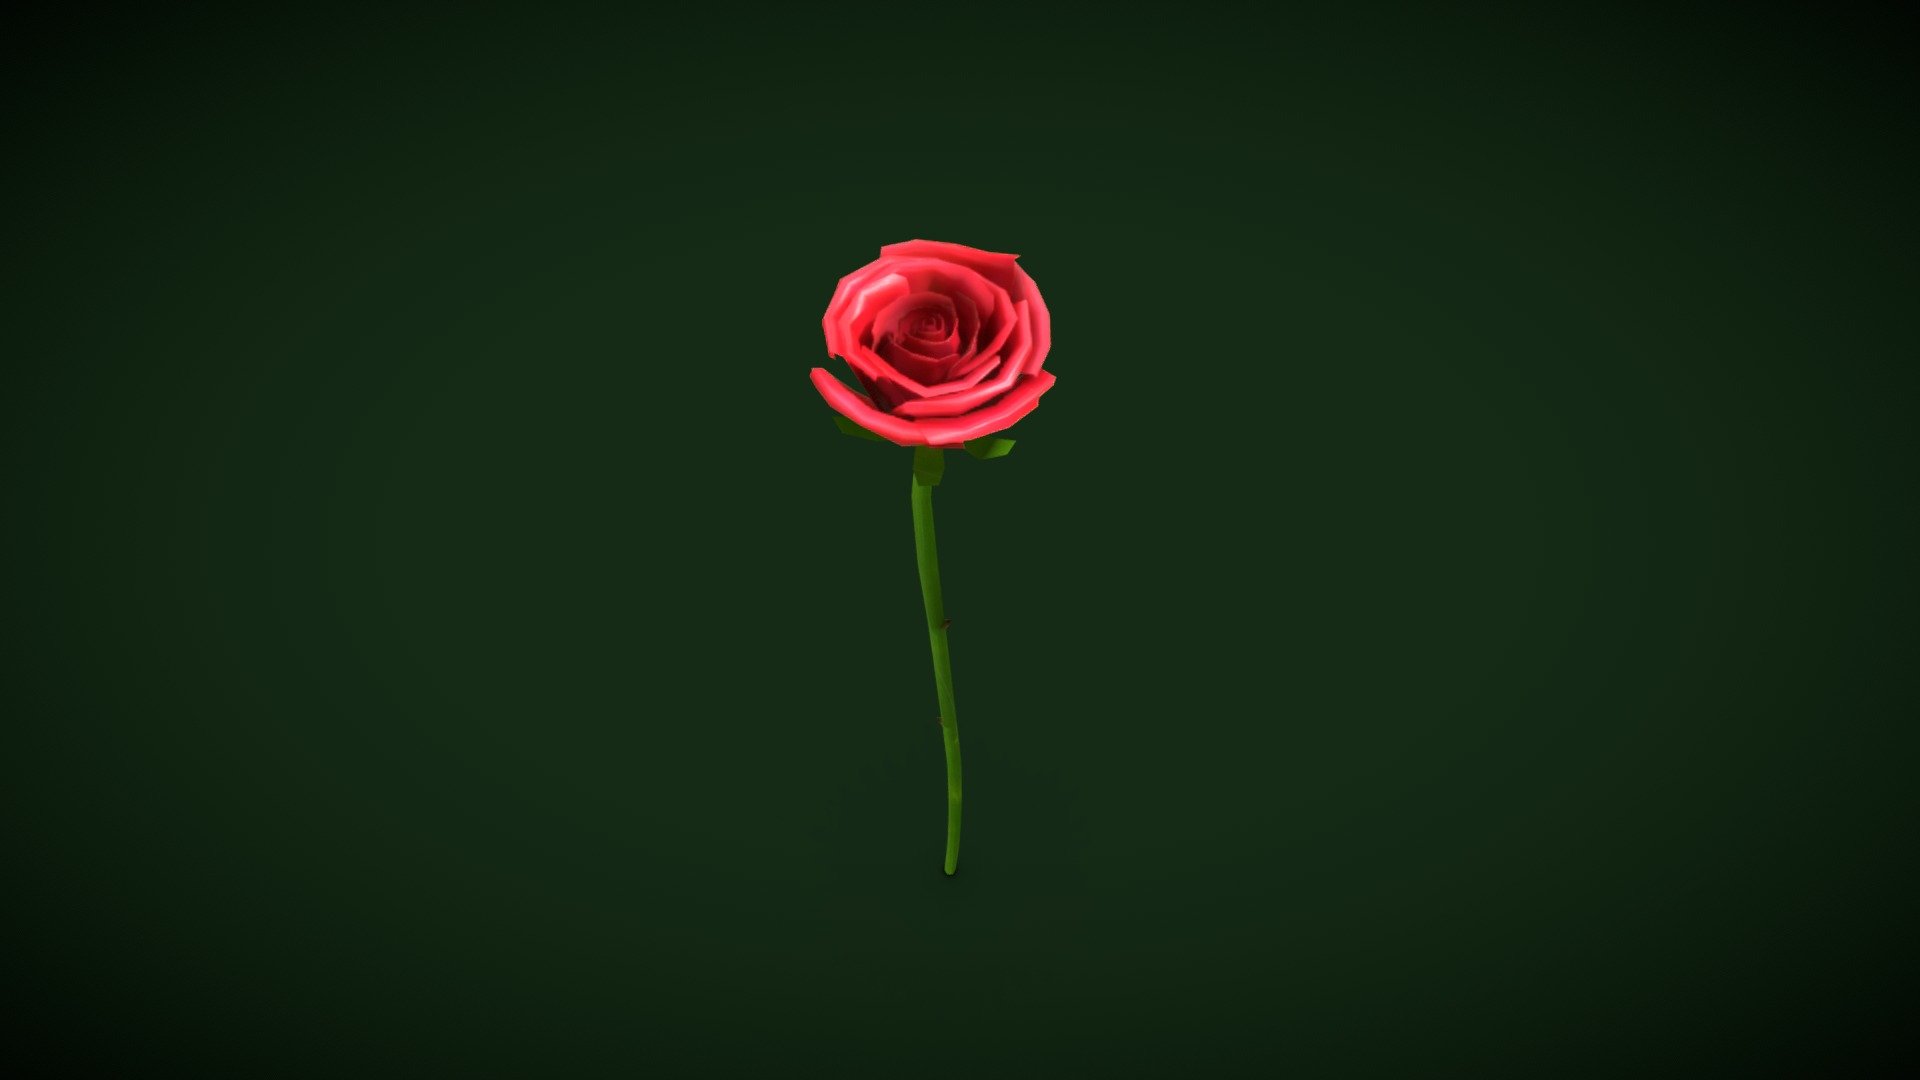 Low Poly model of a rose. Modeled in Maya 2022 and textured in subtance.
If you have any questions, fell free to contact me.

Modelo low poly de una rosa. Modelado en Maya 2022 y texturizado en substance.
Si tienes alguna duda no dudes en preguntarme 3d model